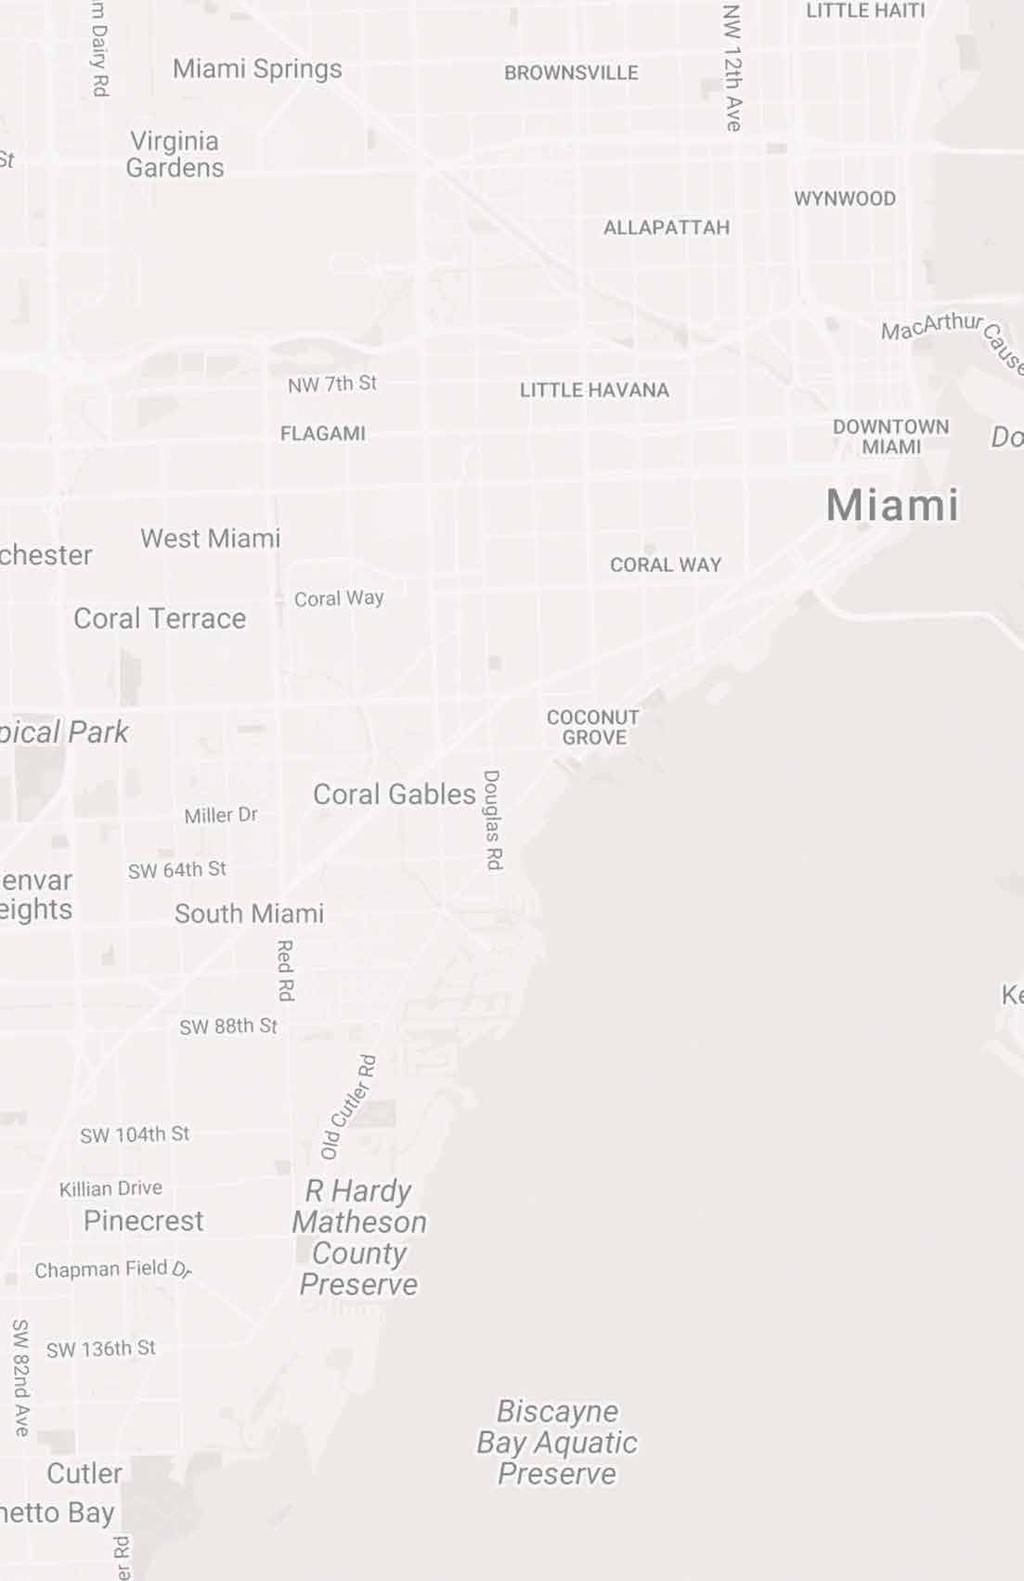 Miami s Most Idyllic Neighborhood 8325 Cheryl Lane is located in a luxury area known as